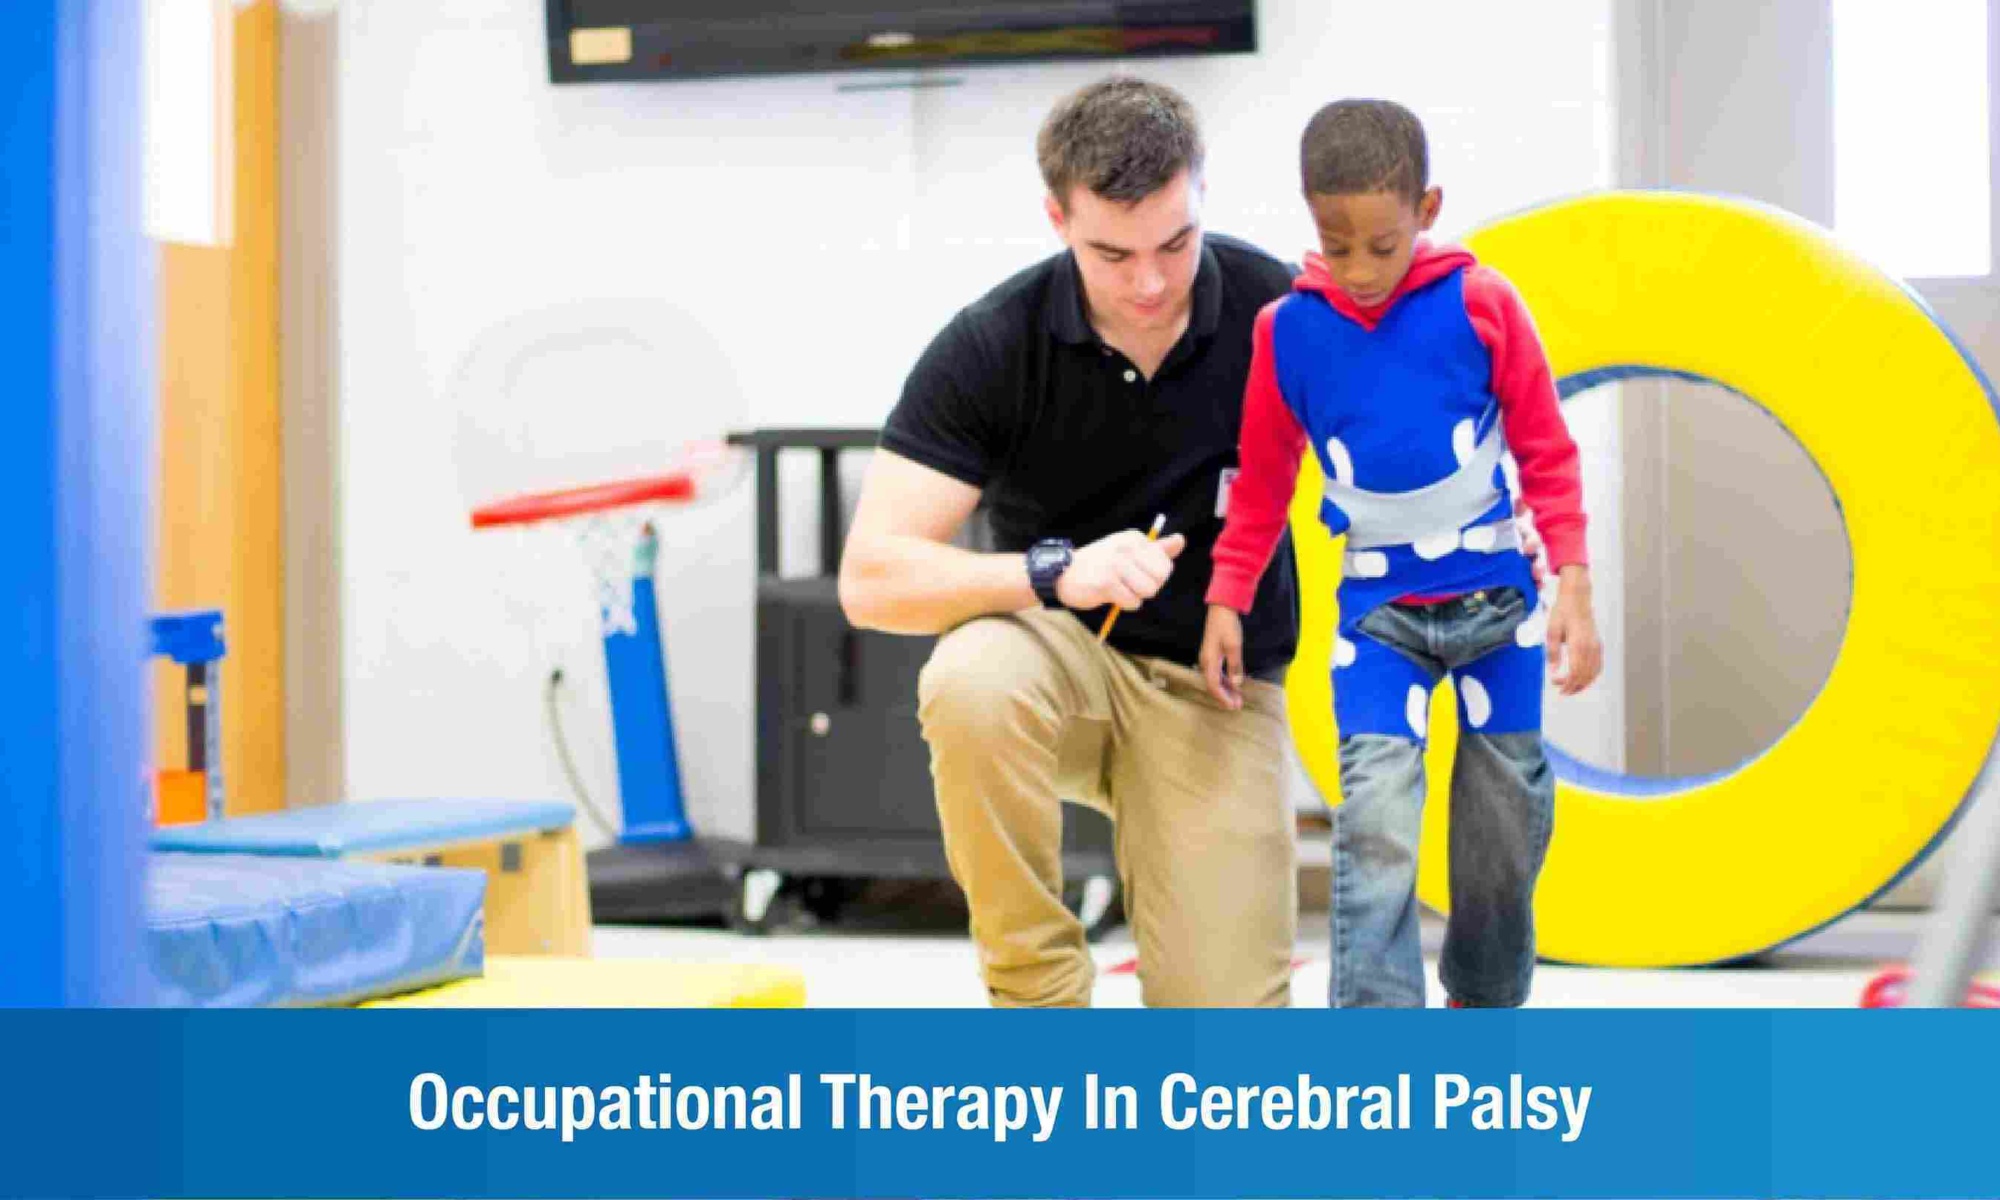 Occupational Therapy in Cerebral Palsy